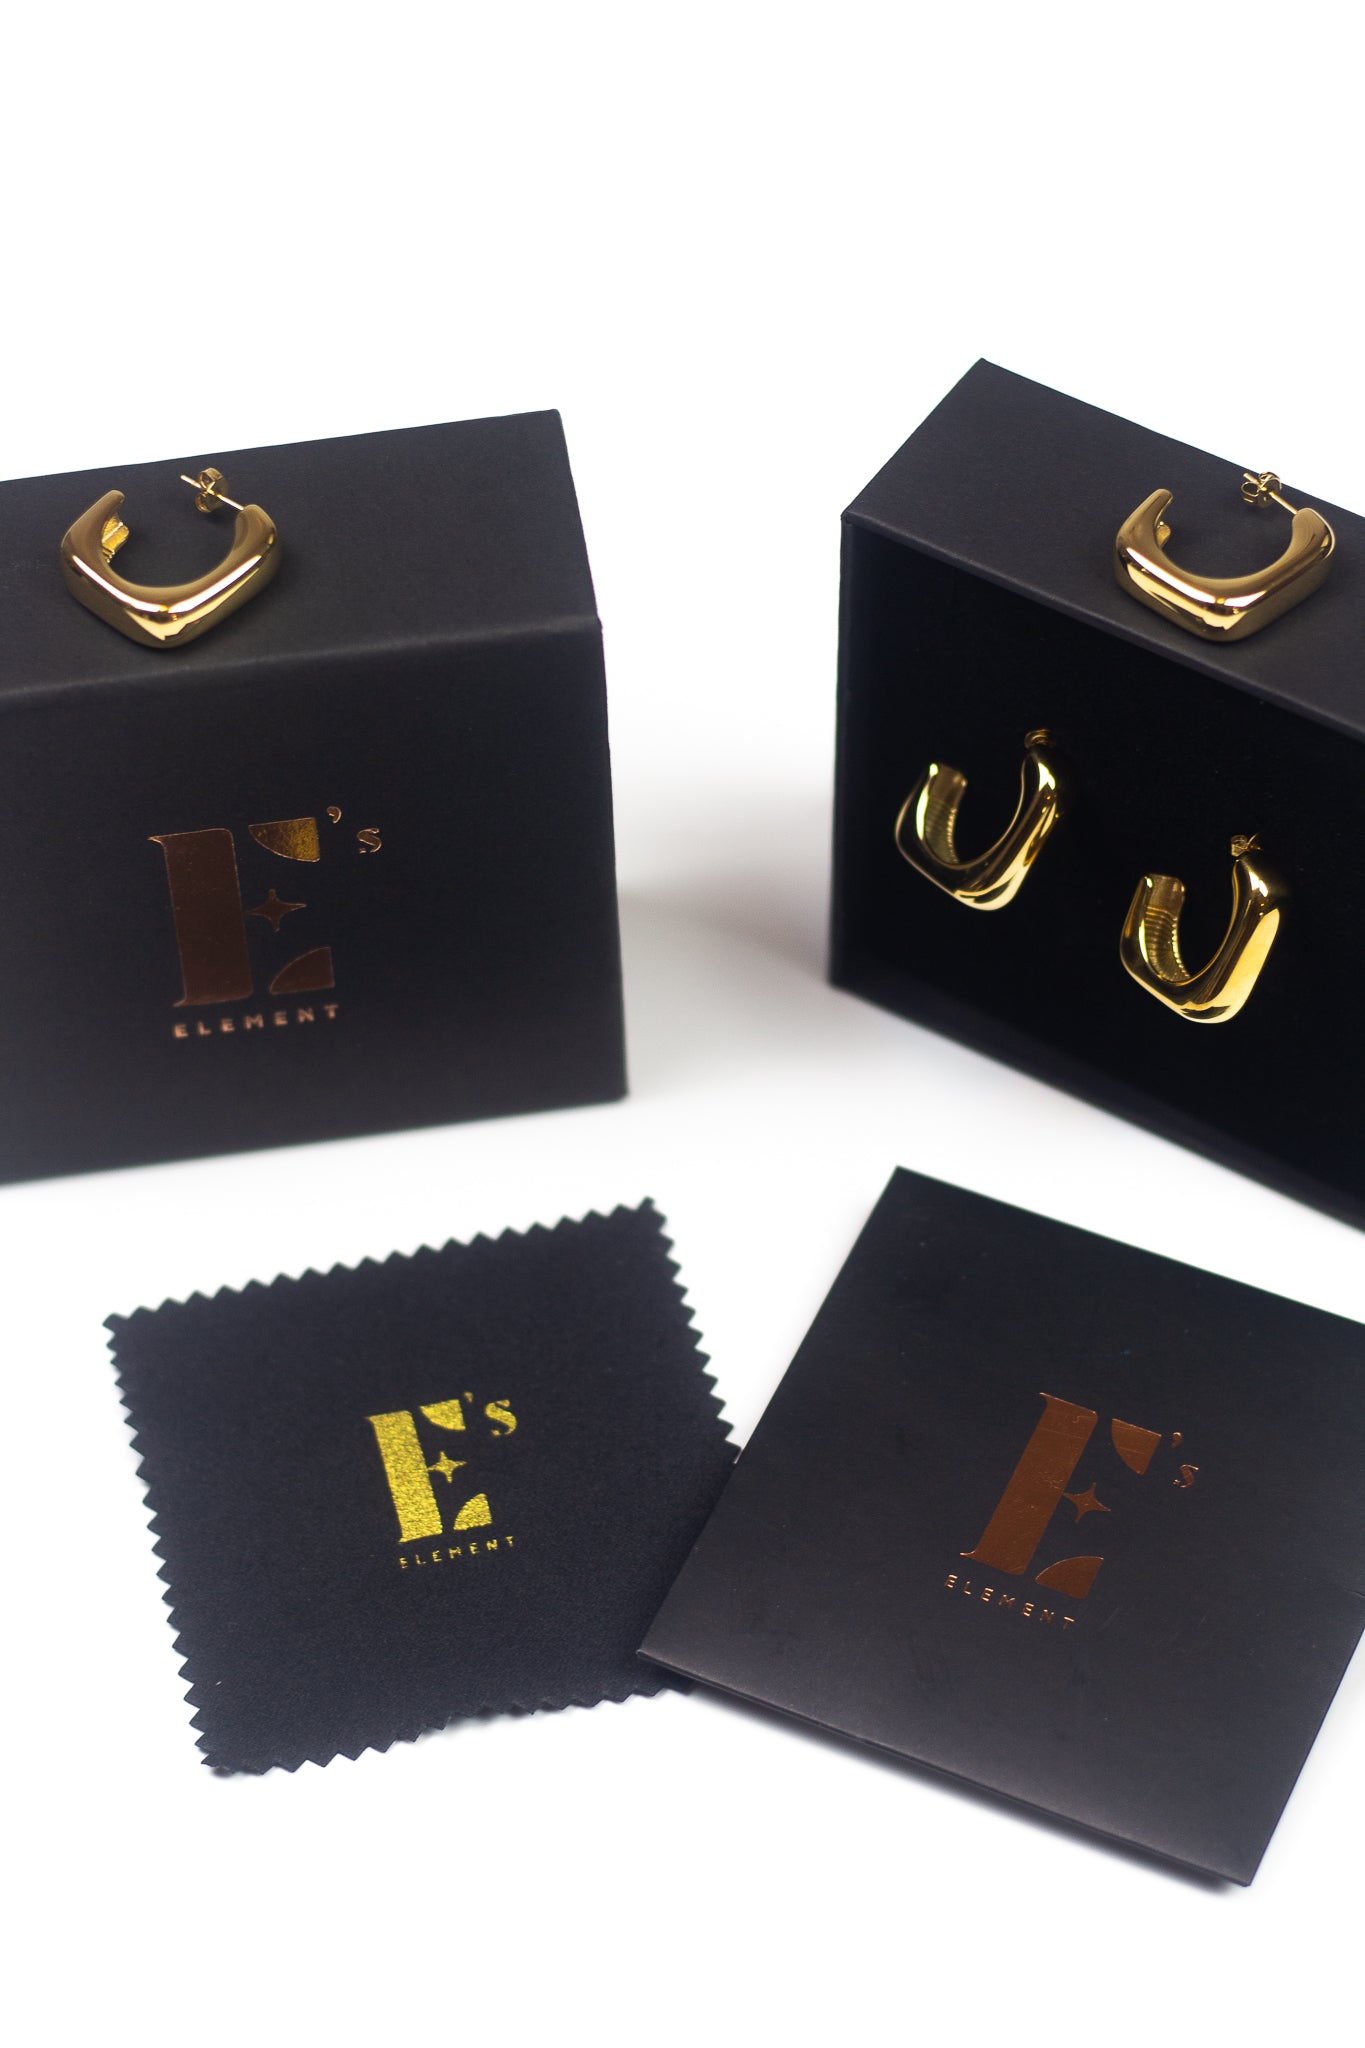 18k gold stainless steel hoop earrings resting on top of its container. There is a polishing cloth and business card with E's Element logo printed in gold underneath. Angel Hoops by E's Element.